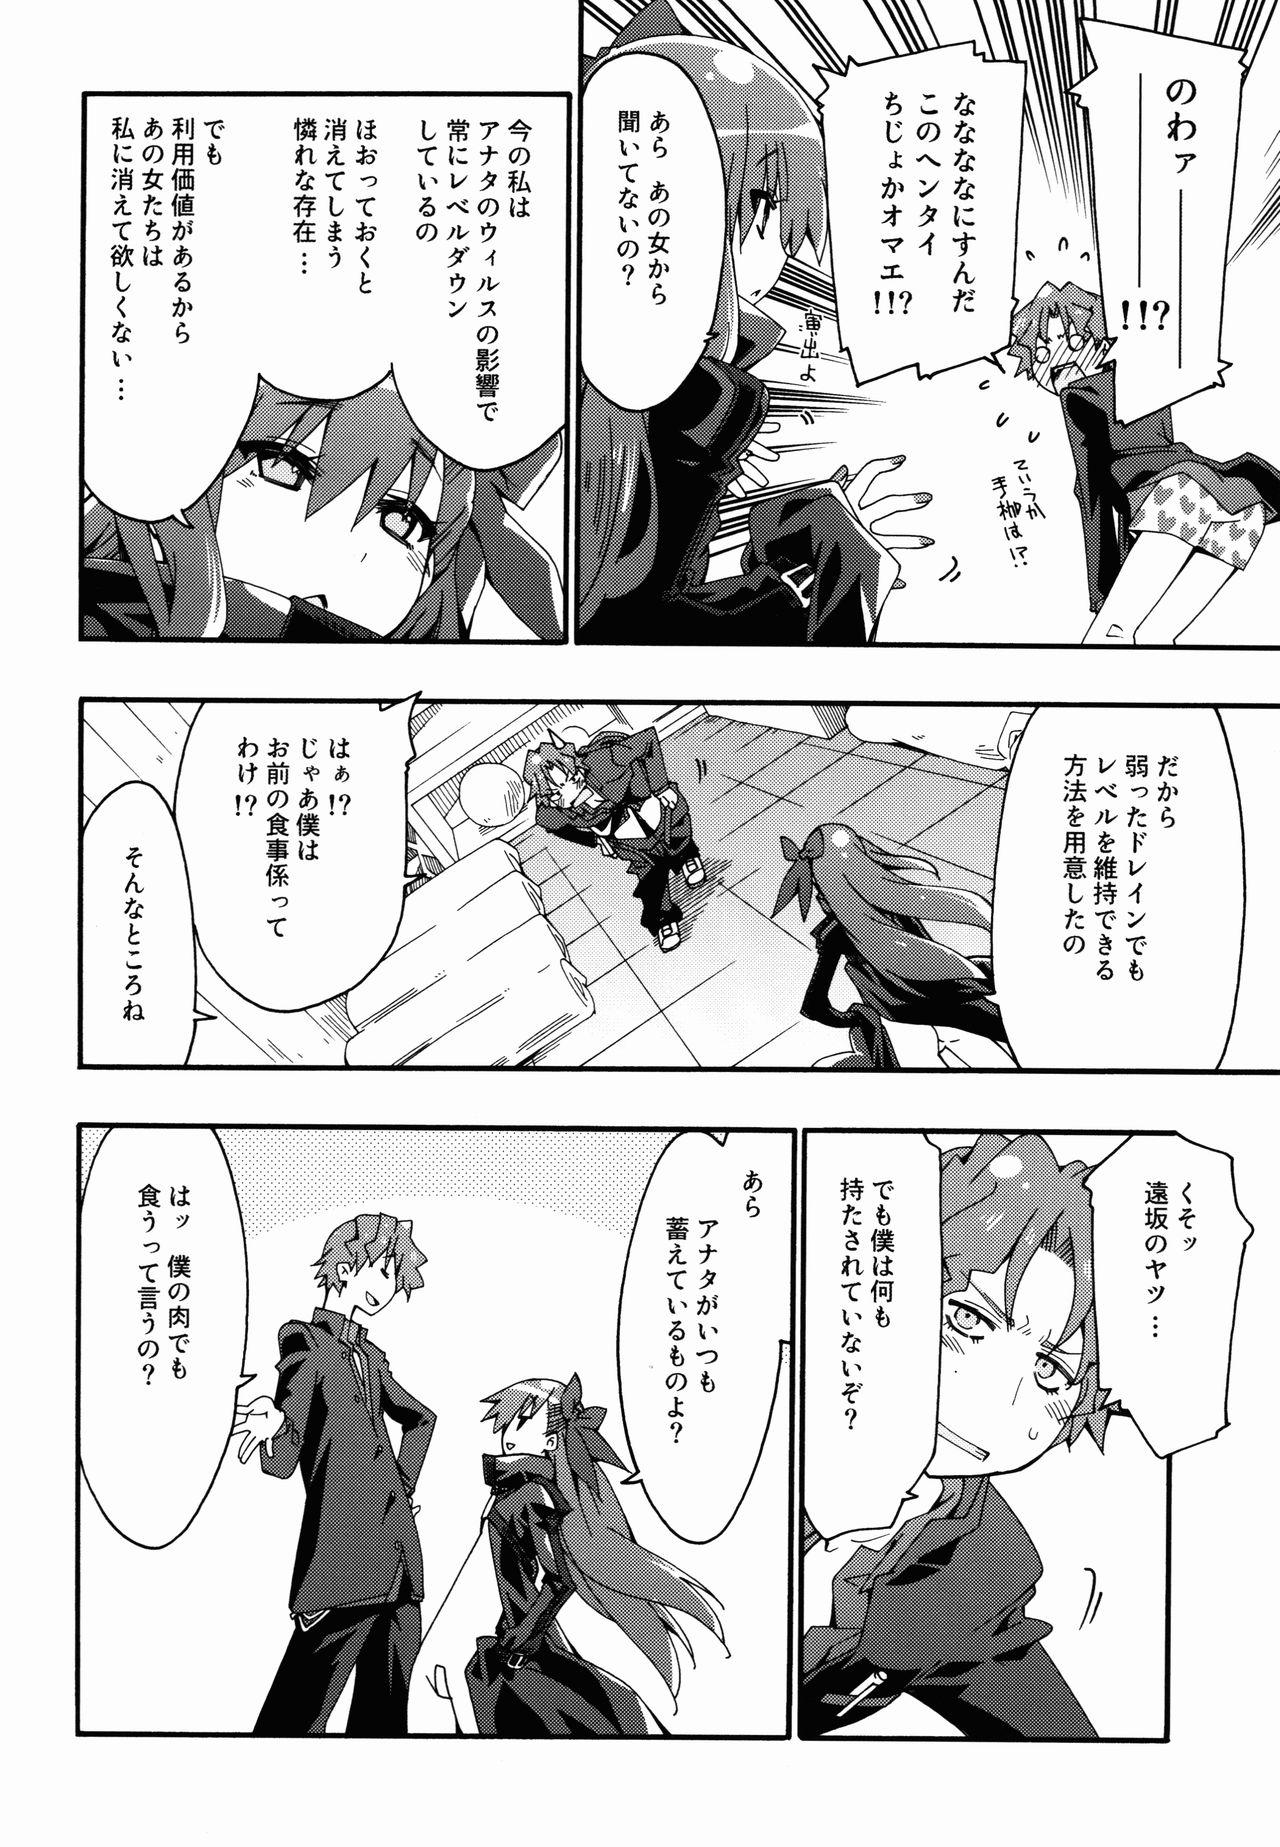 Groupfuck Melty/kiss - Fate extra Amateurs Gone Wild - Page 10